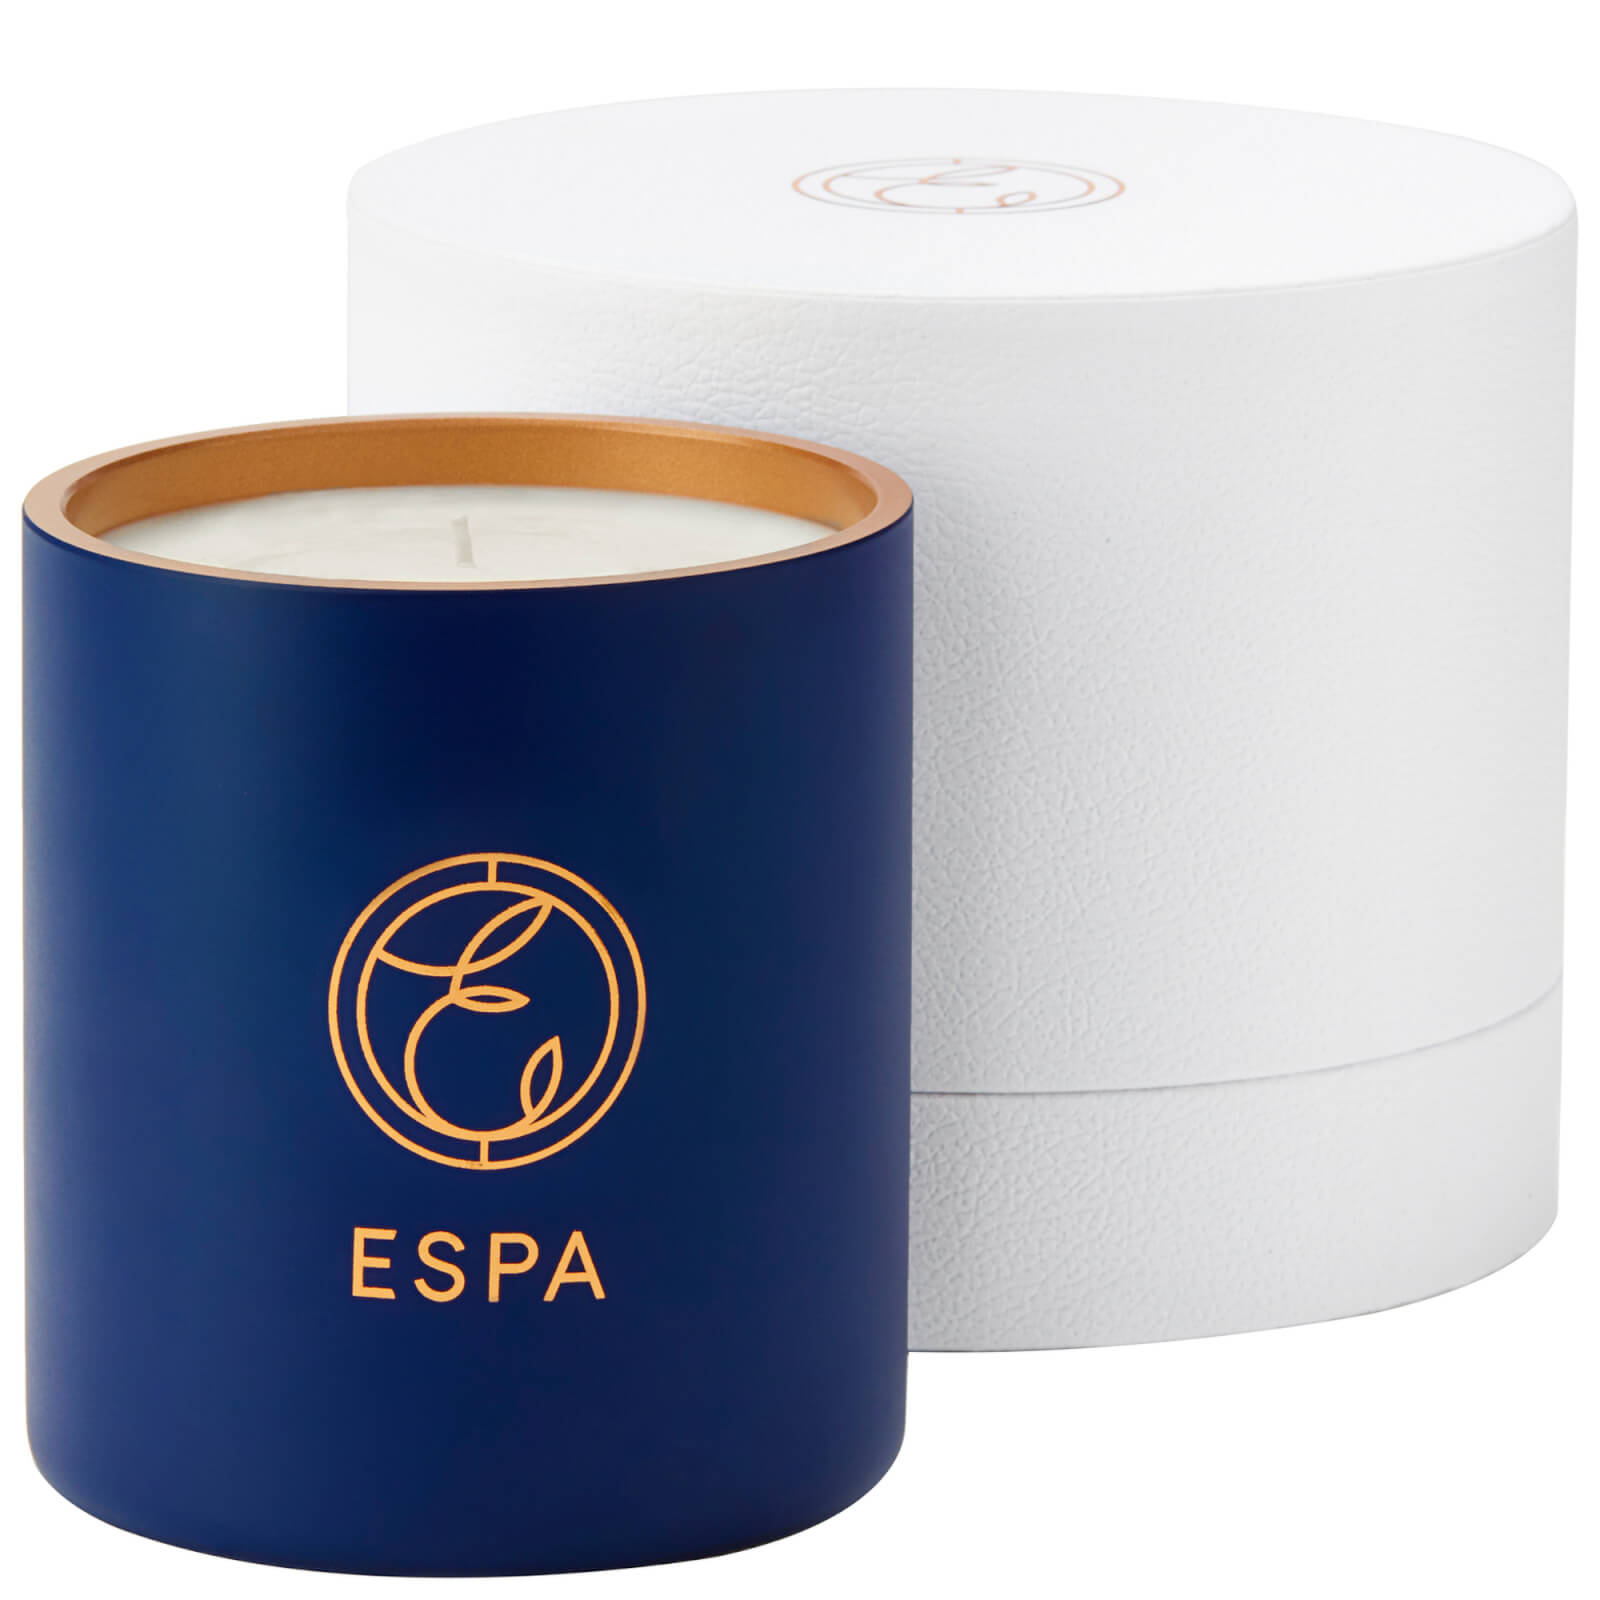 Image of ESPA Winter Spice Standard 200g Candle